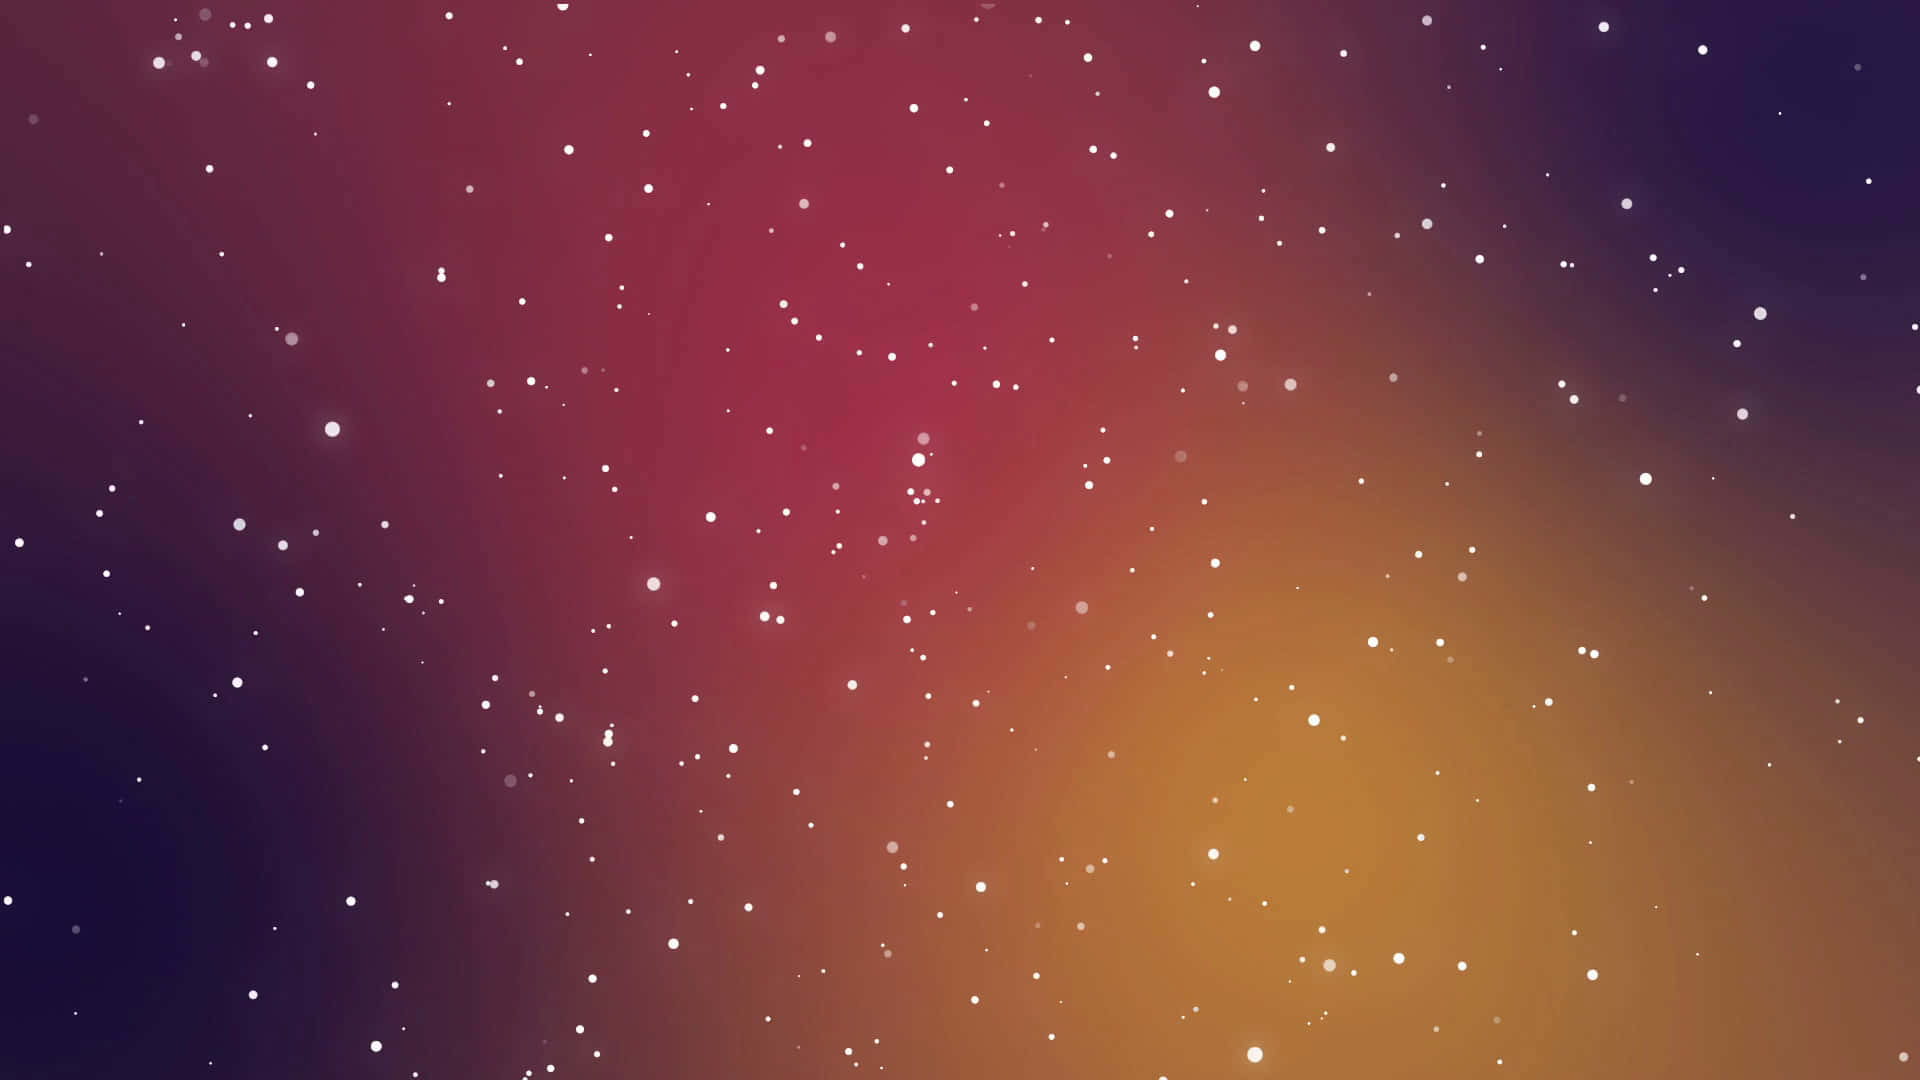 An Ethereal Field of Dreams - Pink Star Background